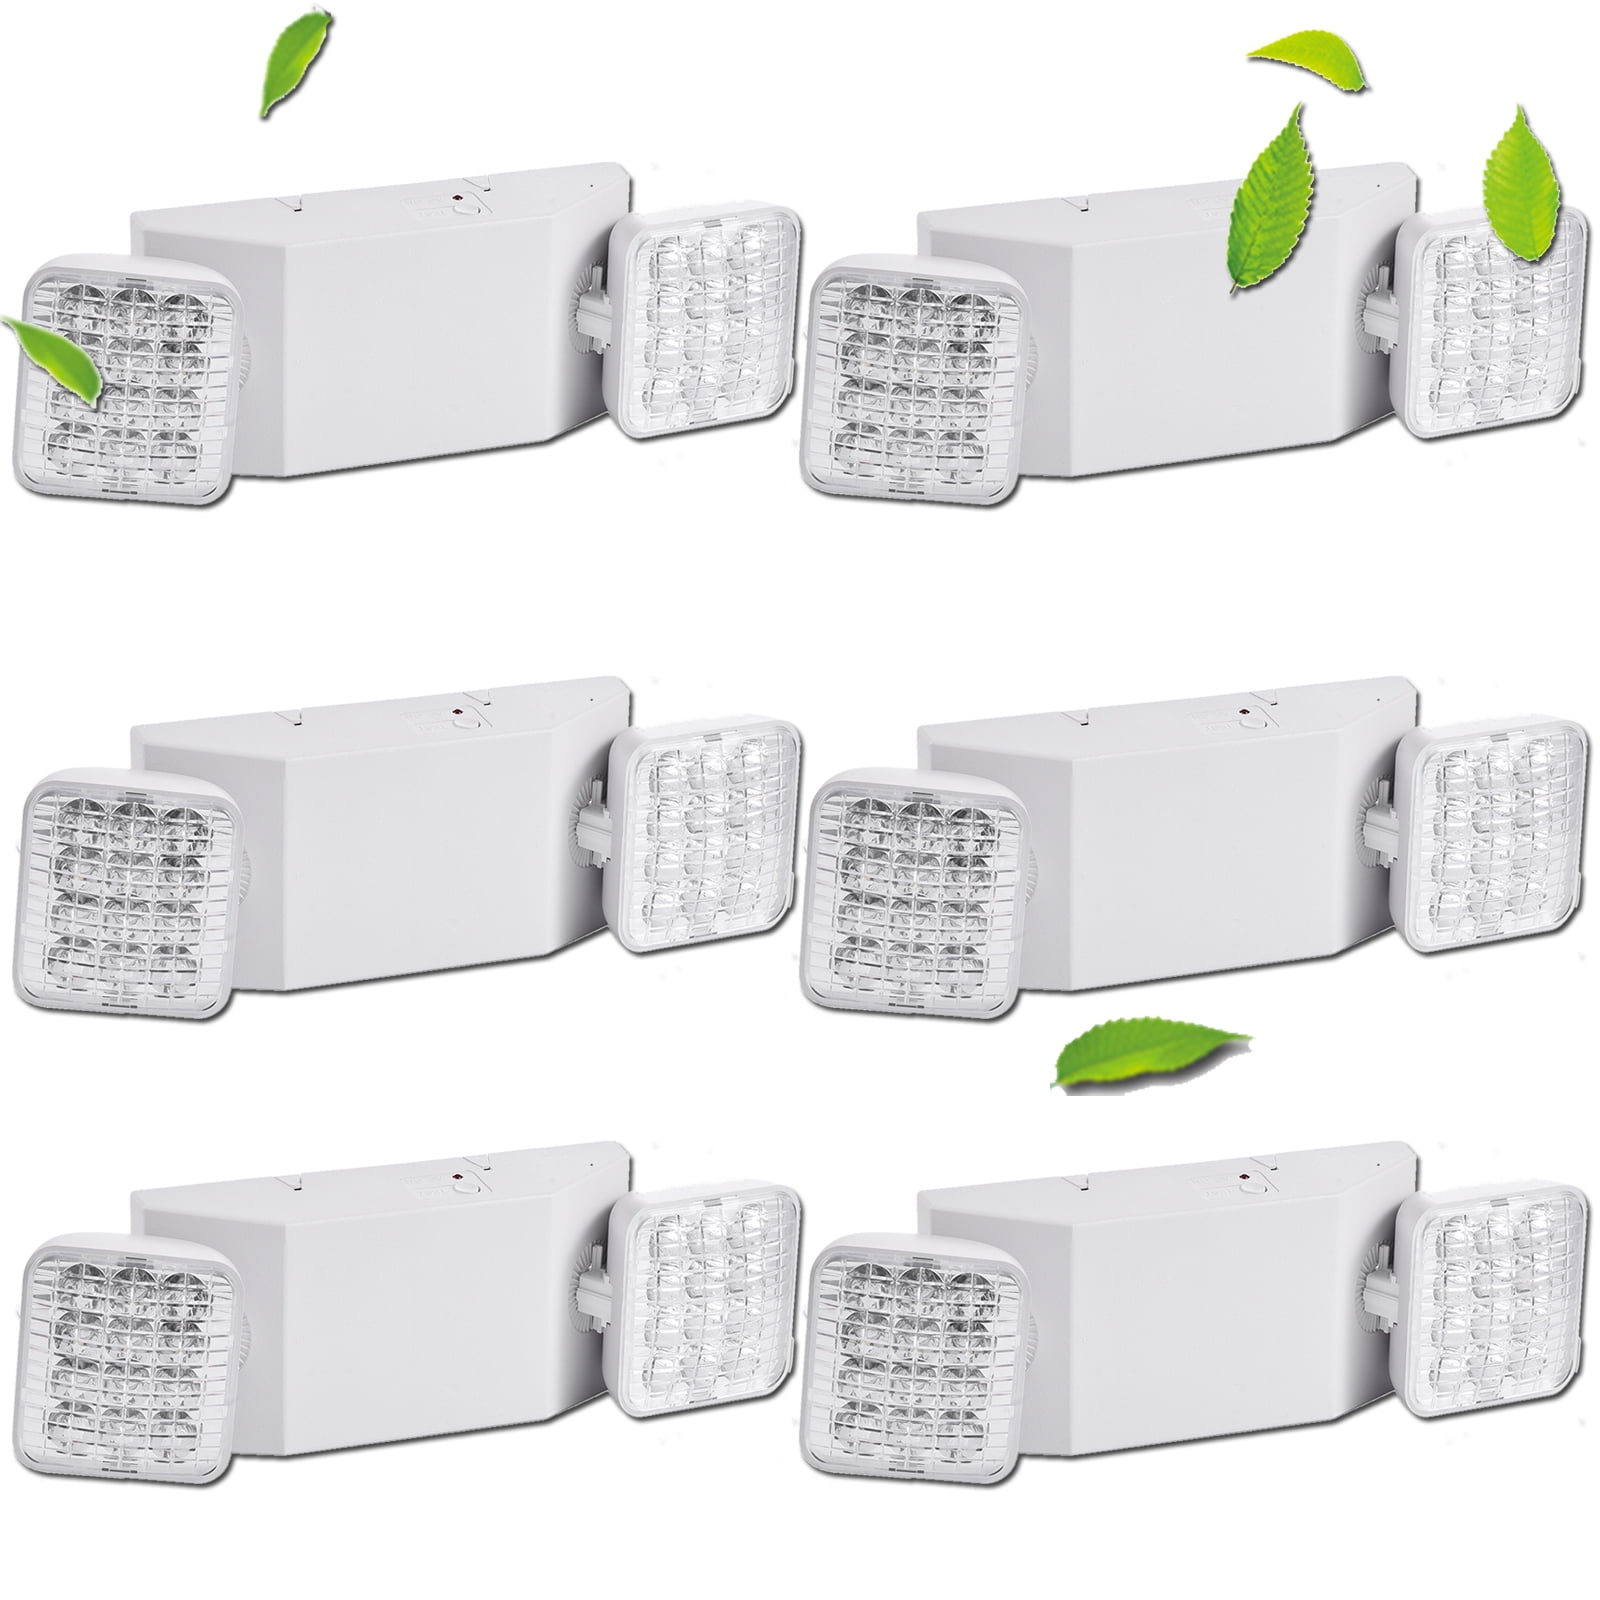 PowerFlare® 6 Pack Battery Operated LED Safety Light - LEA-AID